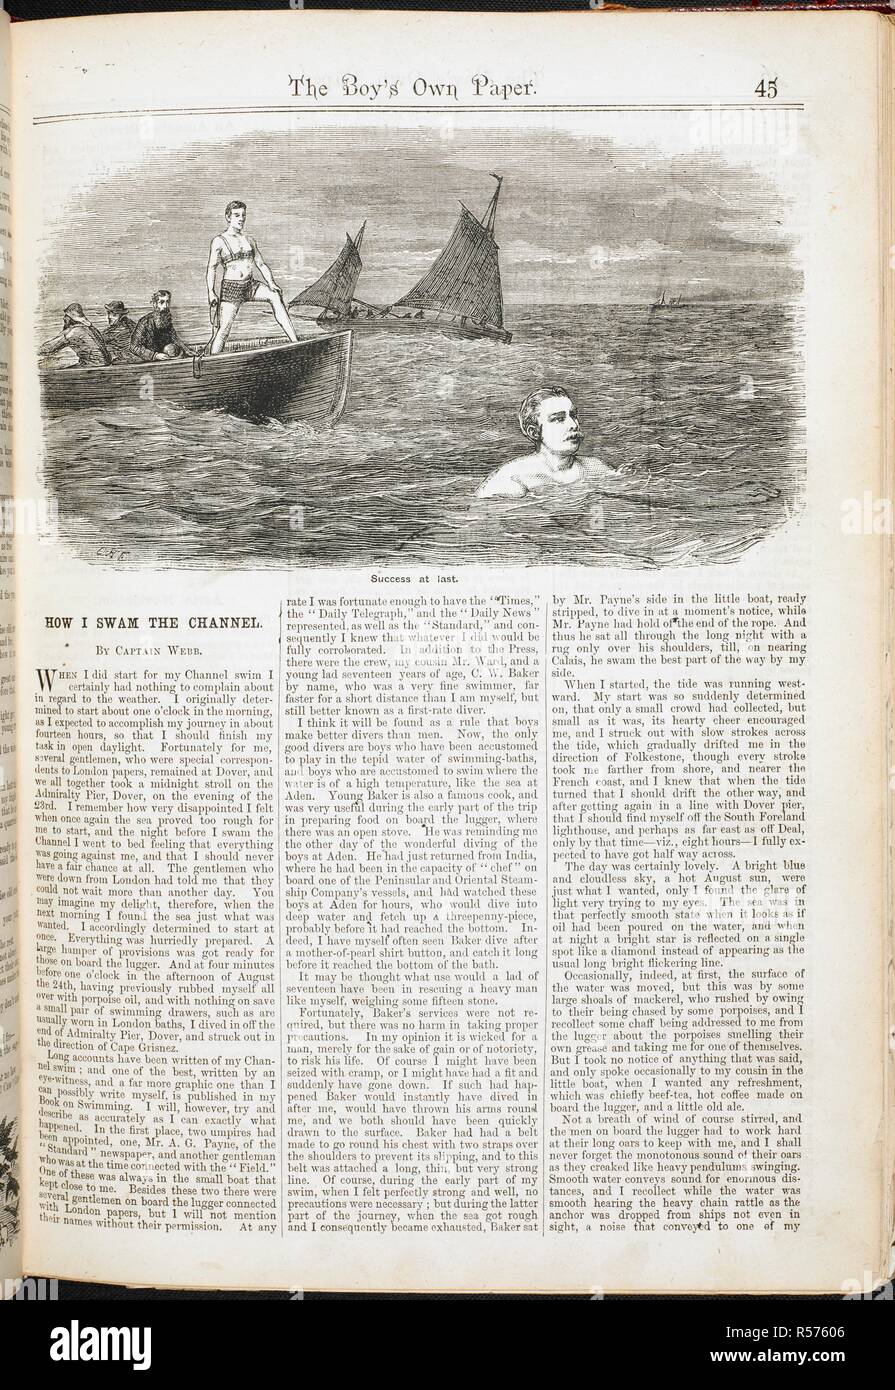 How I swam the channel.' By Capt.Webb.  Captain Matthew Webb (19 January 1848 â€“ 24 July 1883) was the first recorded person to swim the English Channel without the use of artificial aids for sport purpose. On 25 August 1875, Webb swam from Dover to Calais in fewer than 22 hours. The Boy's own paper. London : Leisure Hour Office, 1879-1967. (This item, late 19th century). Source: P.P.5993.u.(1) First edition. page 45. Stock Photo